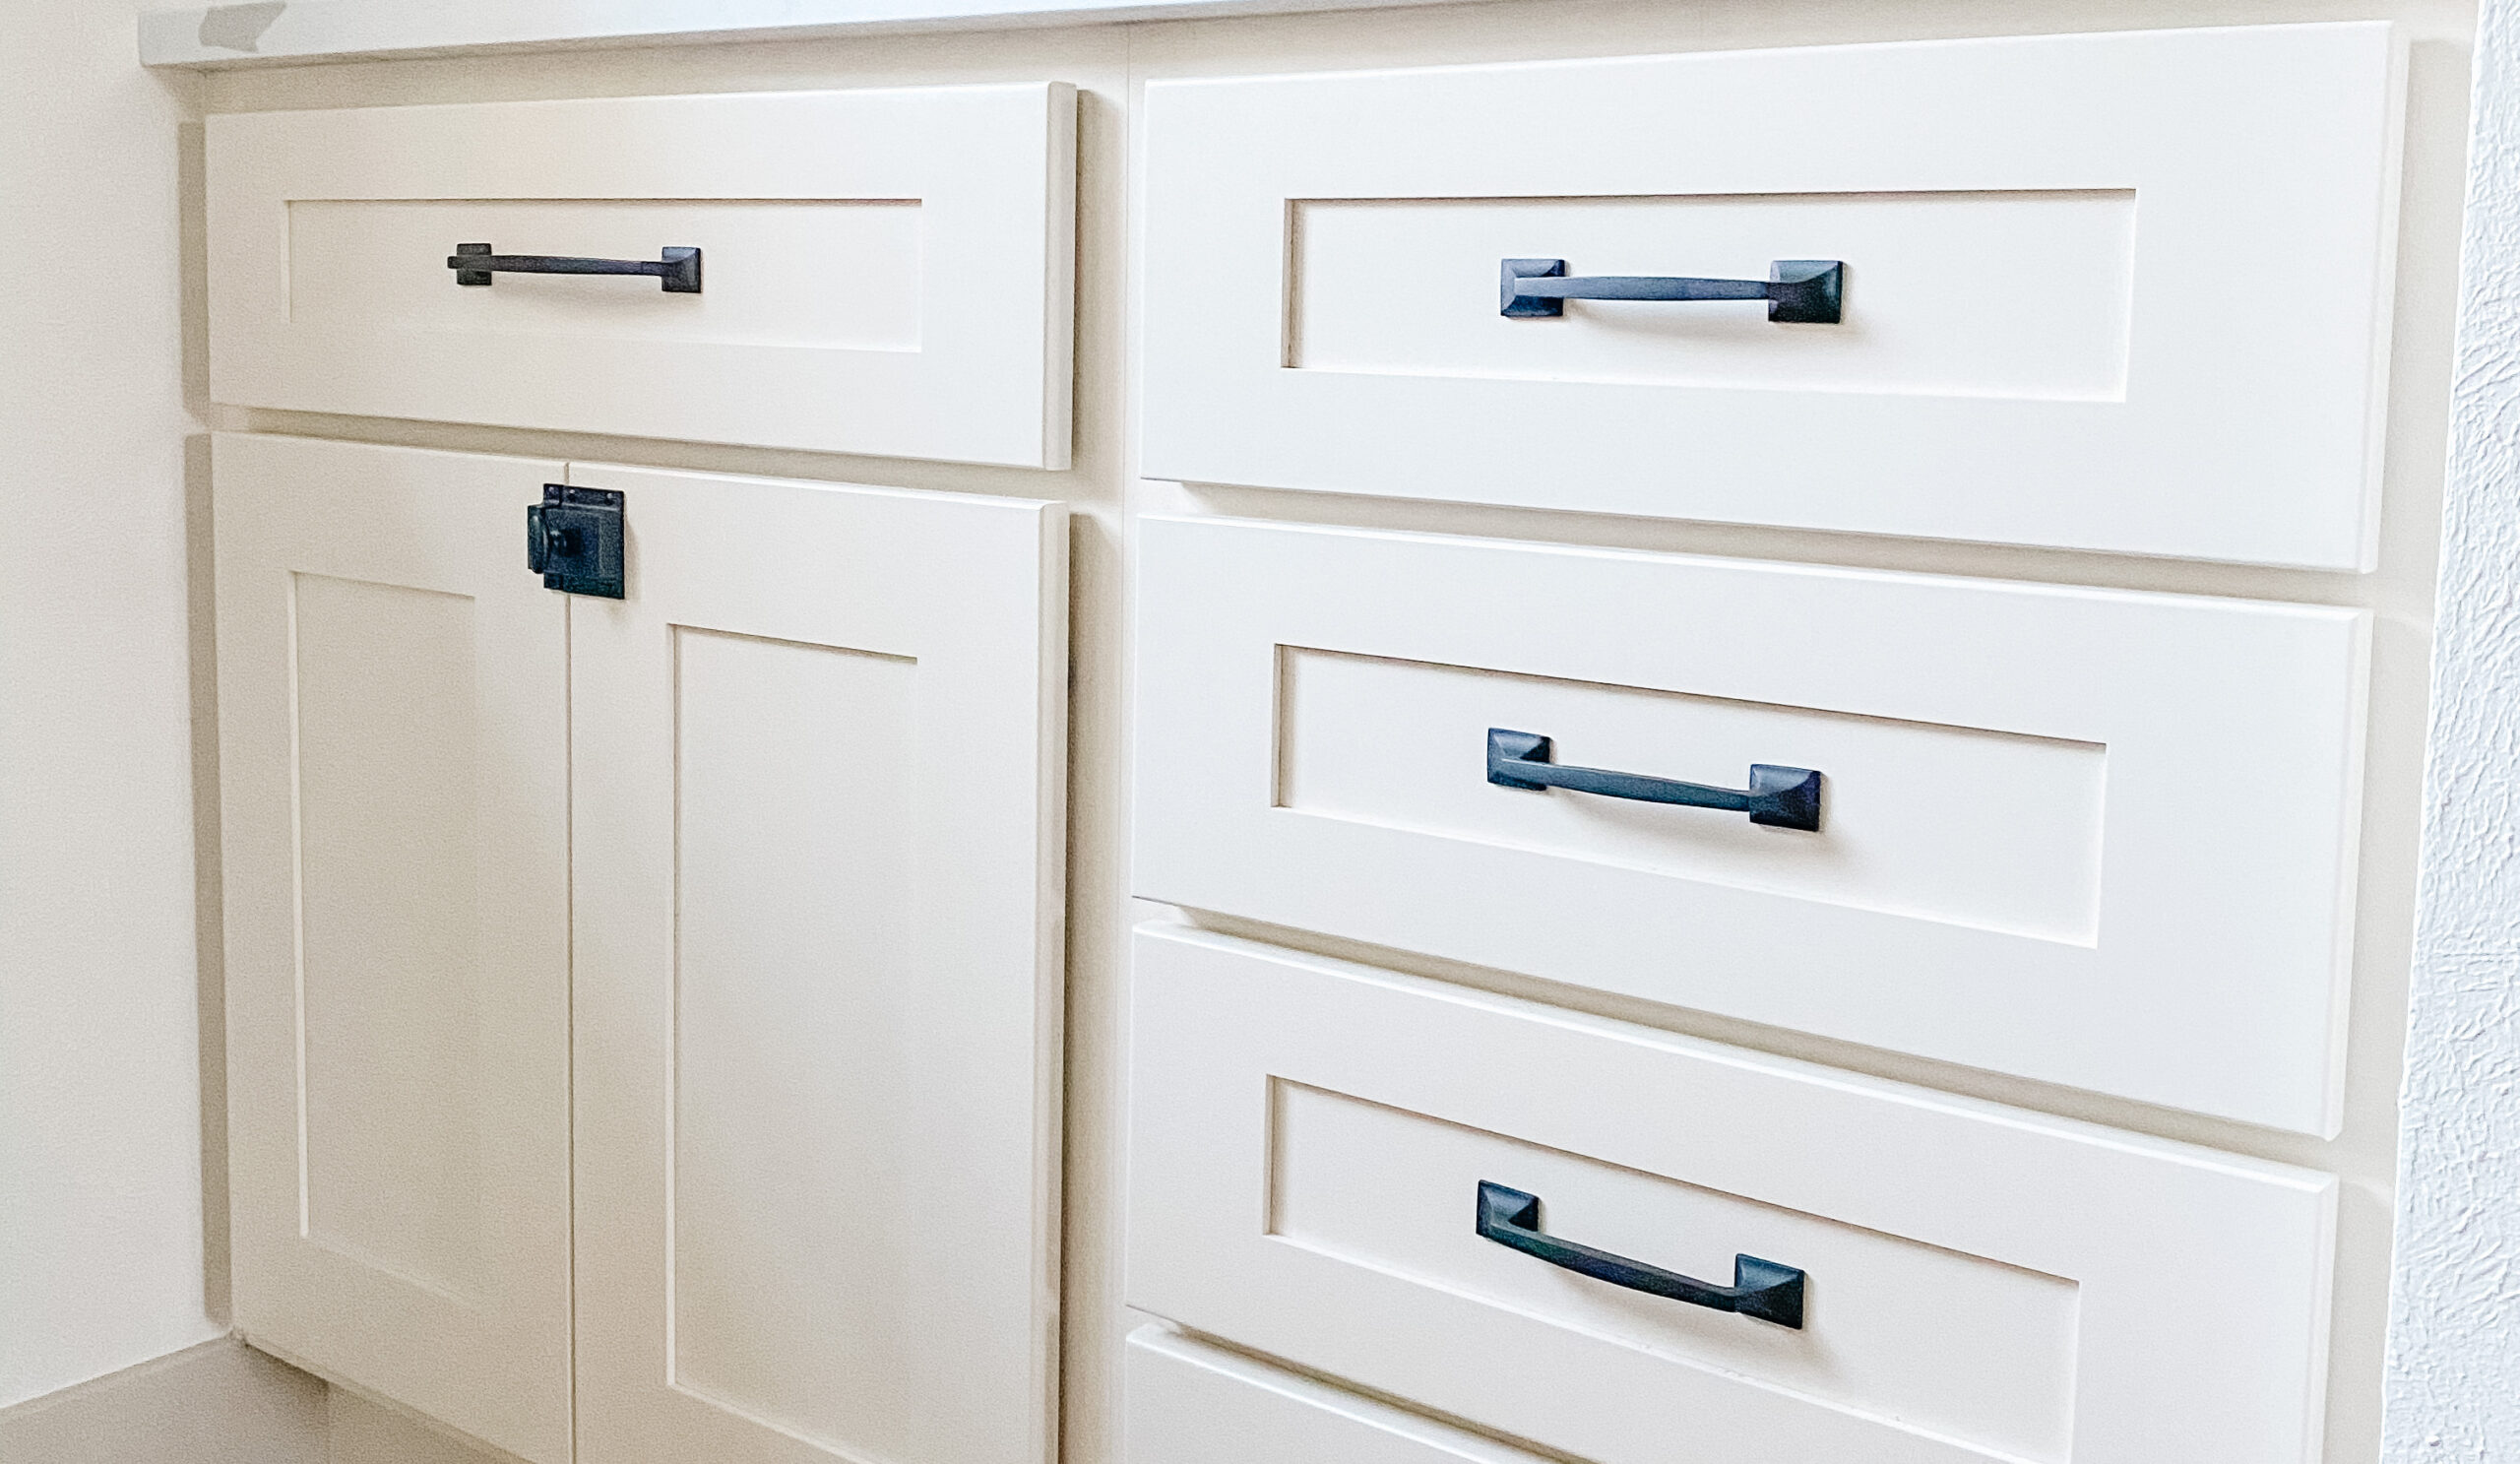 How to Mix and Match Cabinet Hardware